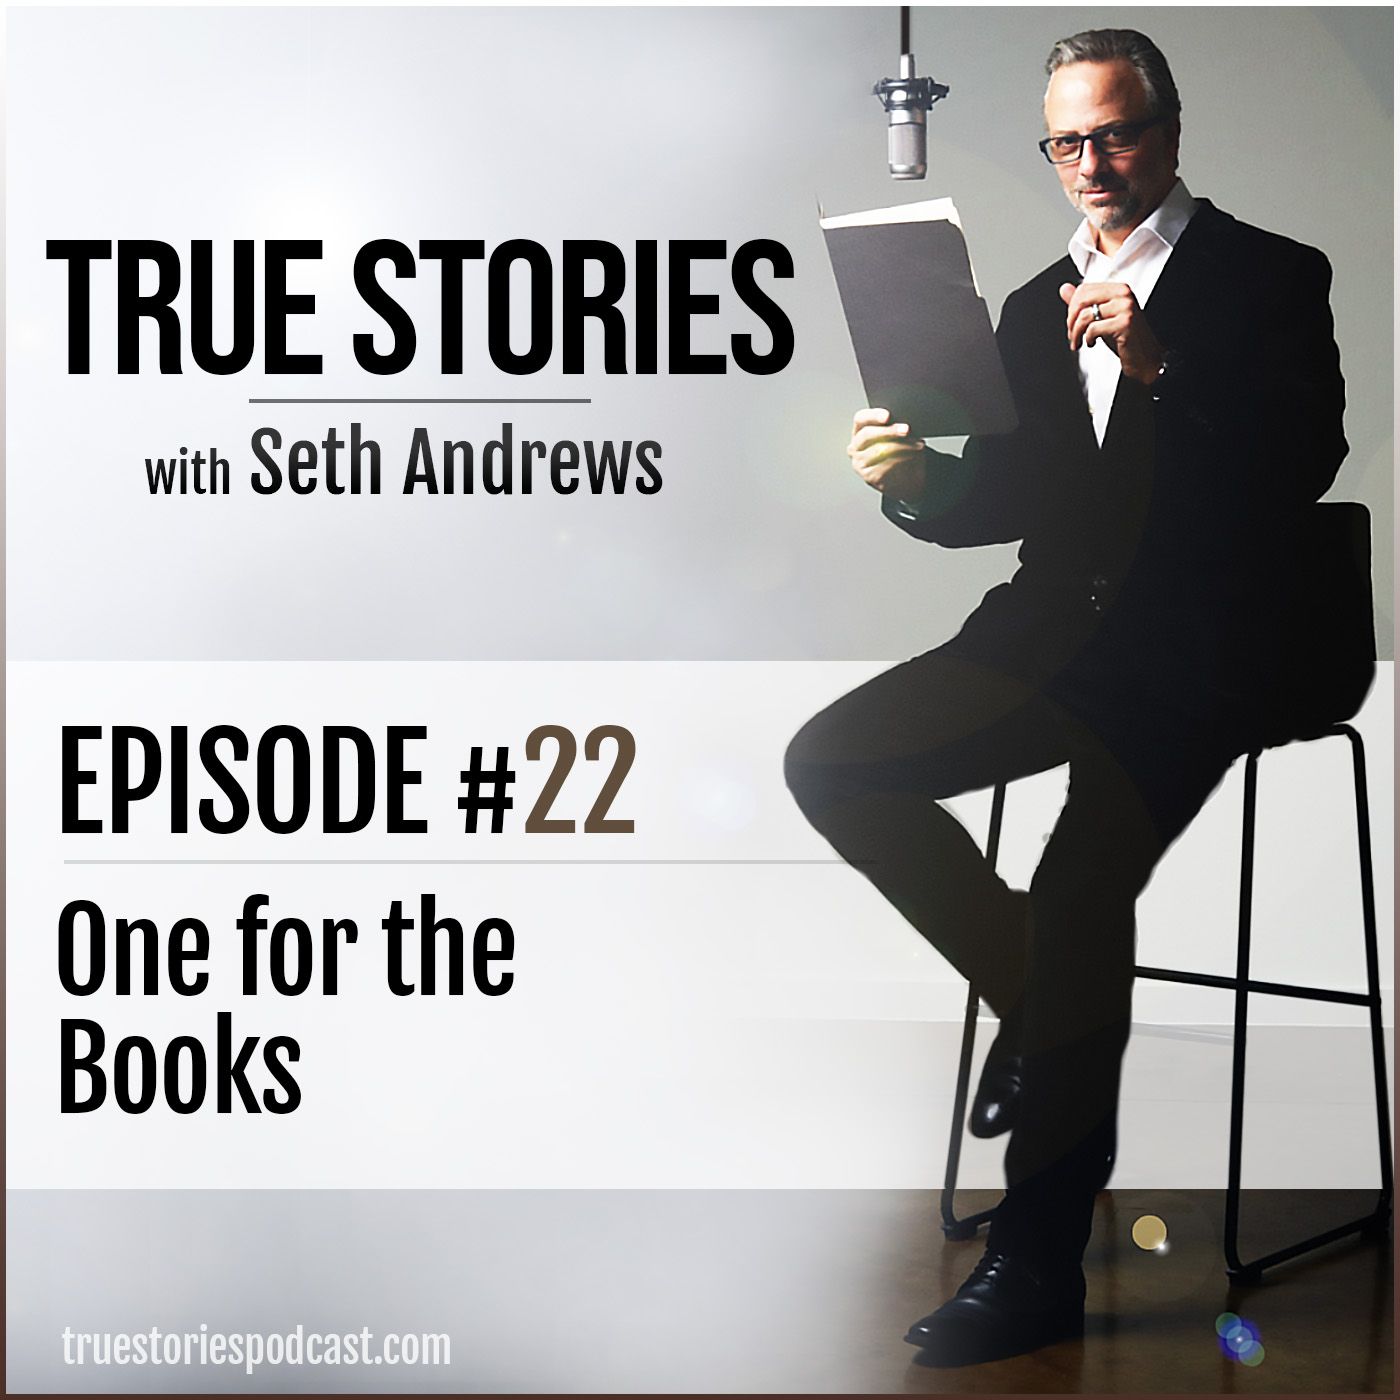 True Stories #22 - One for the Books